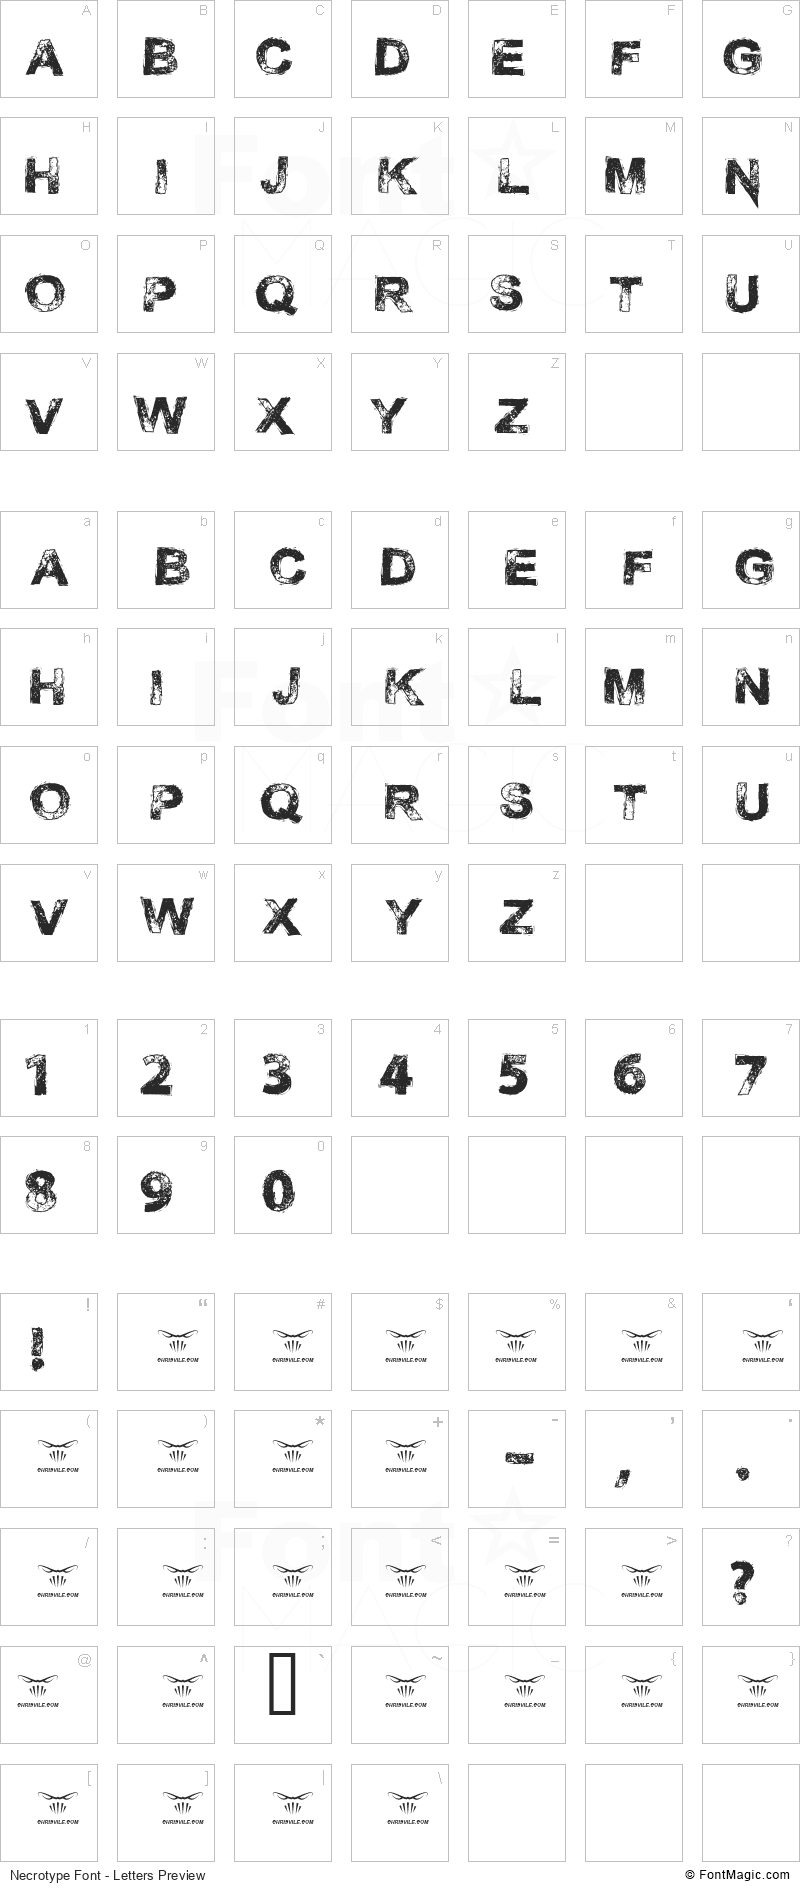 Necrotype Font - All Latters Preview Chart